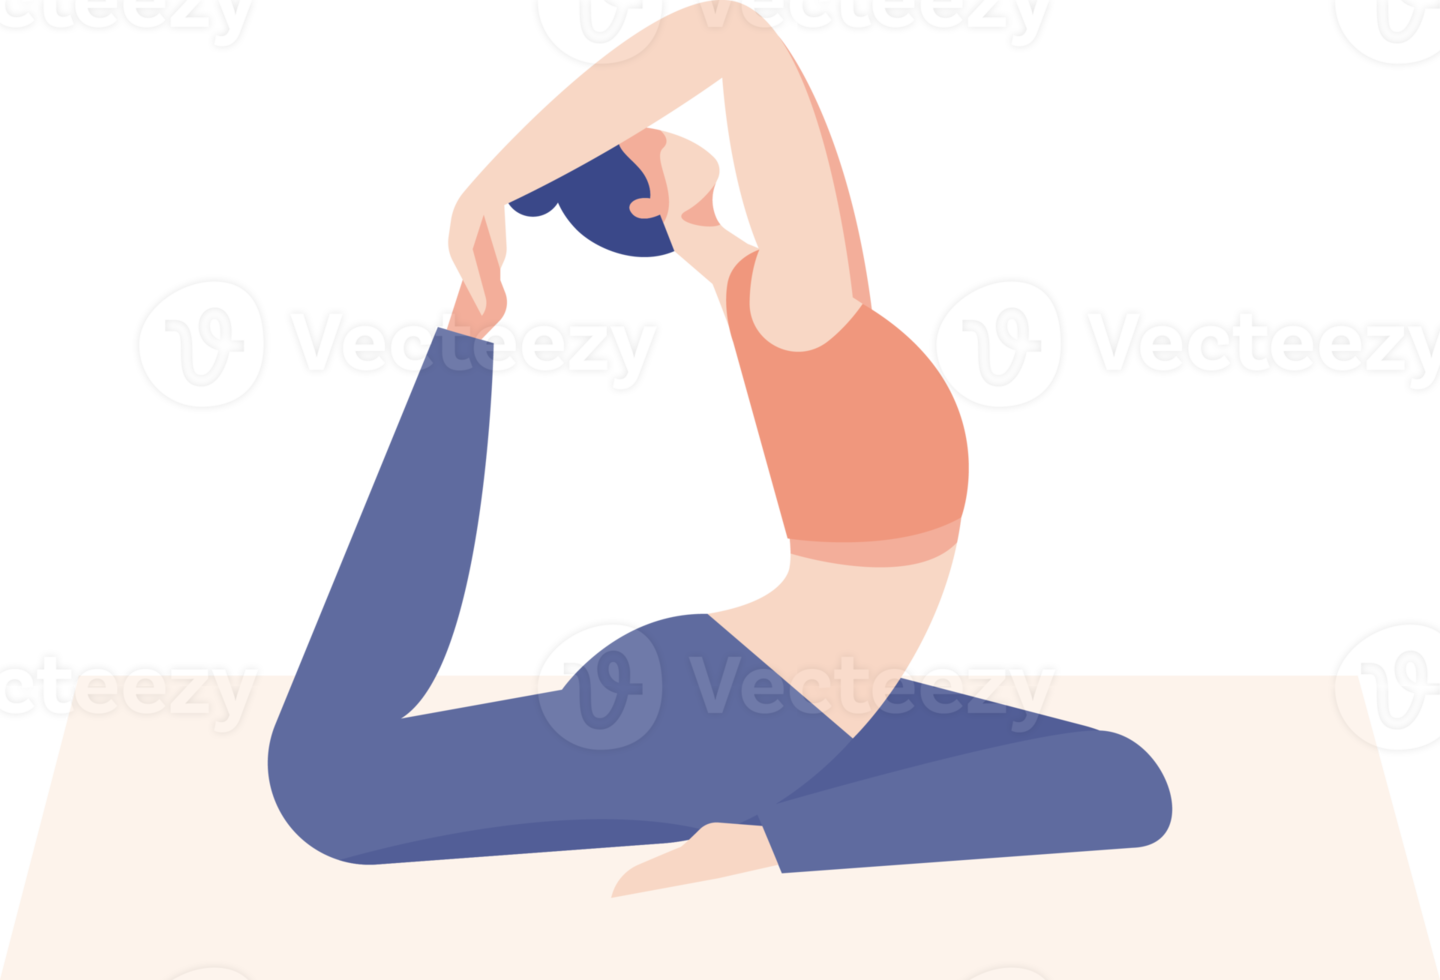 person doing yoga. illustration png